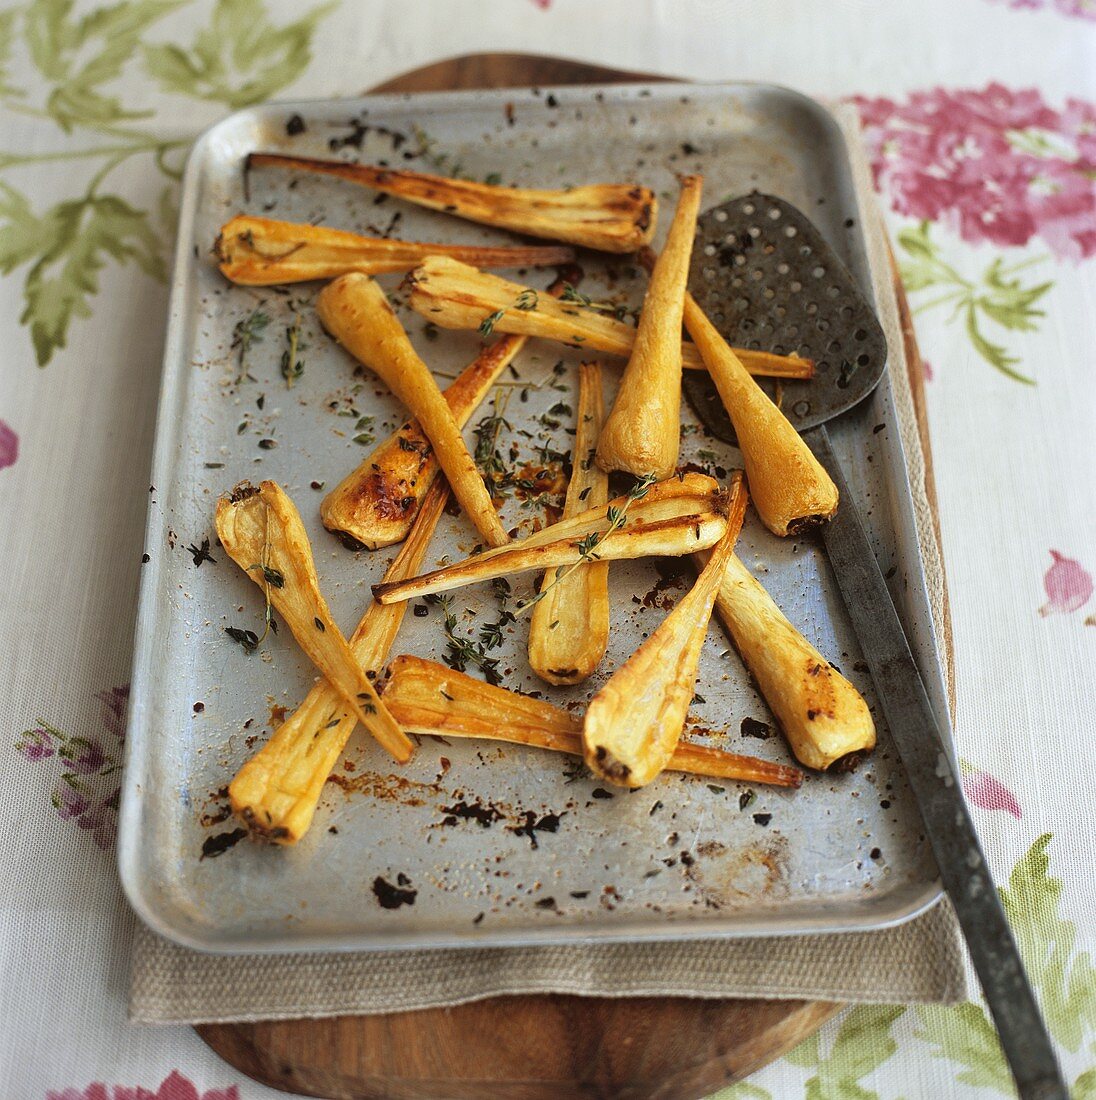 Roasted parsnips with thyme on a baking tray